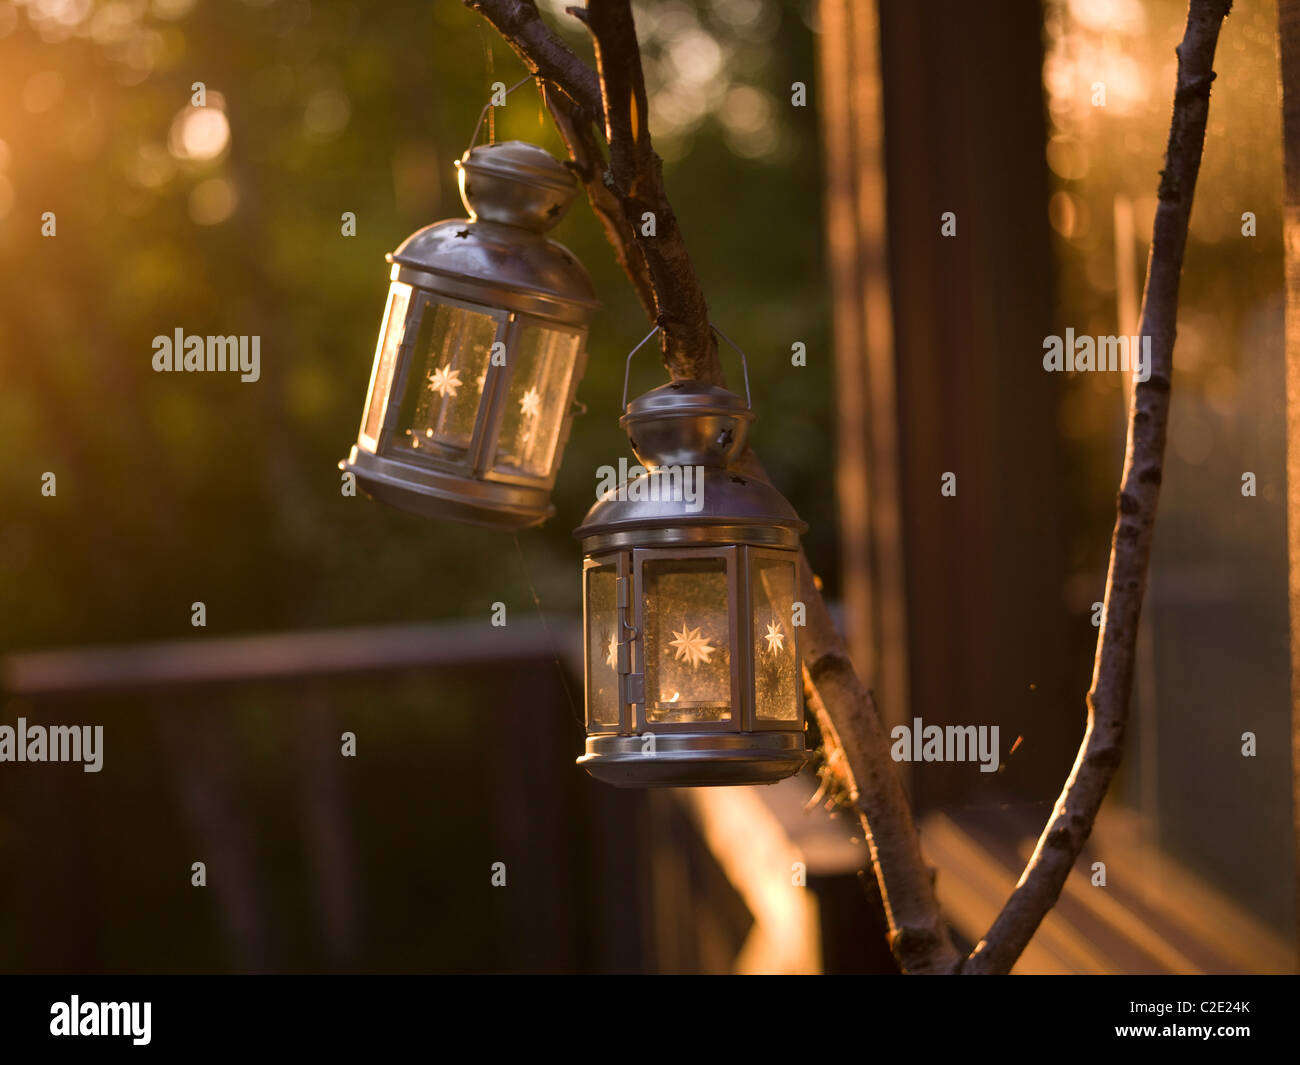 Lake Of The Woods, Ontario, Canada; Lanterns Hanging From Branch Stock Photo